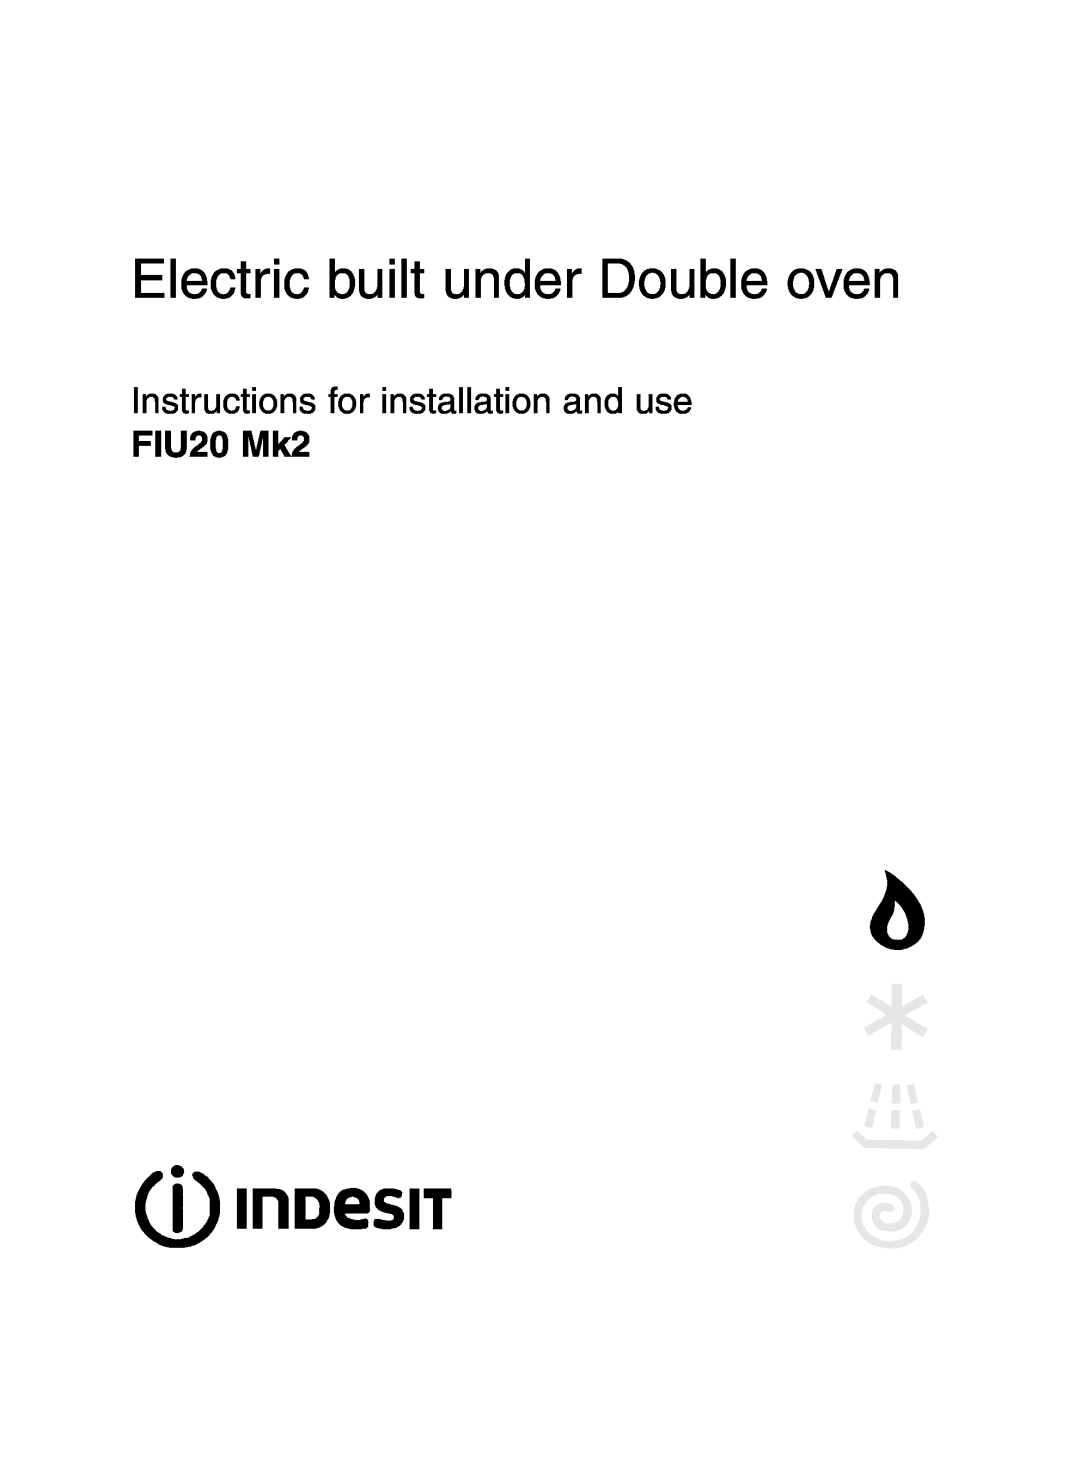 Indesit FIU20 MK2 manual FIU20 Mk2, Electric built under Double oven, Instructions for installation and use 